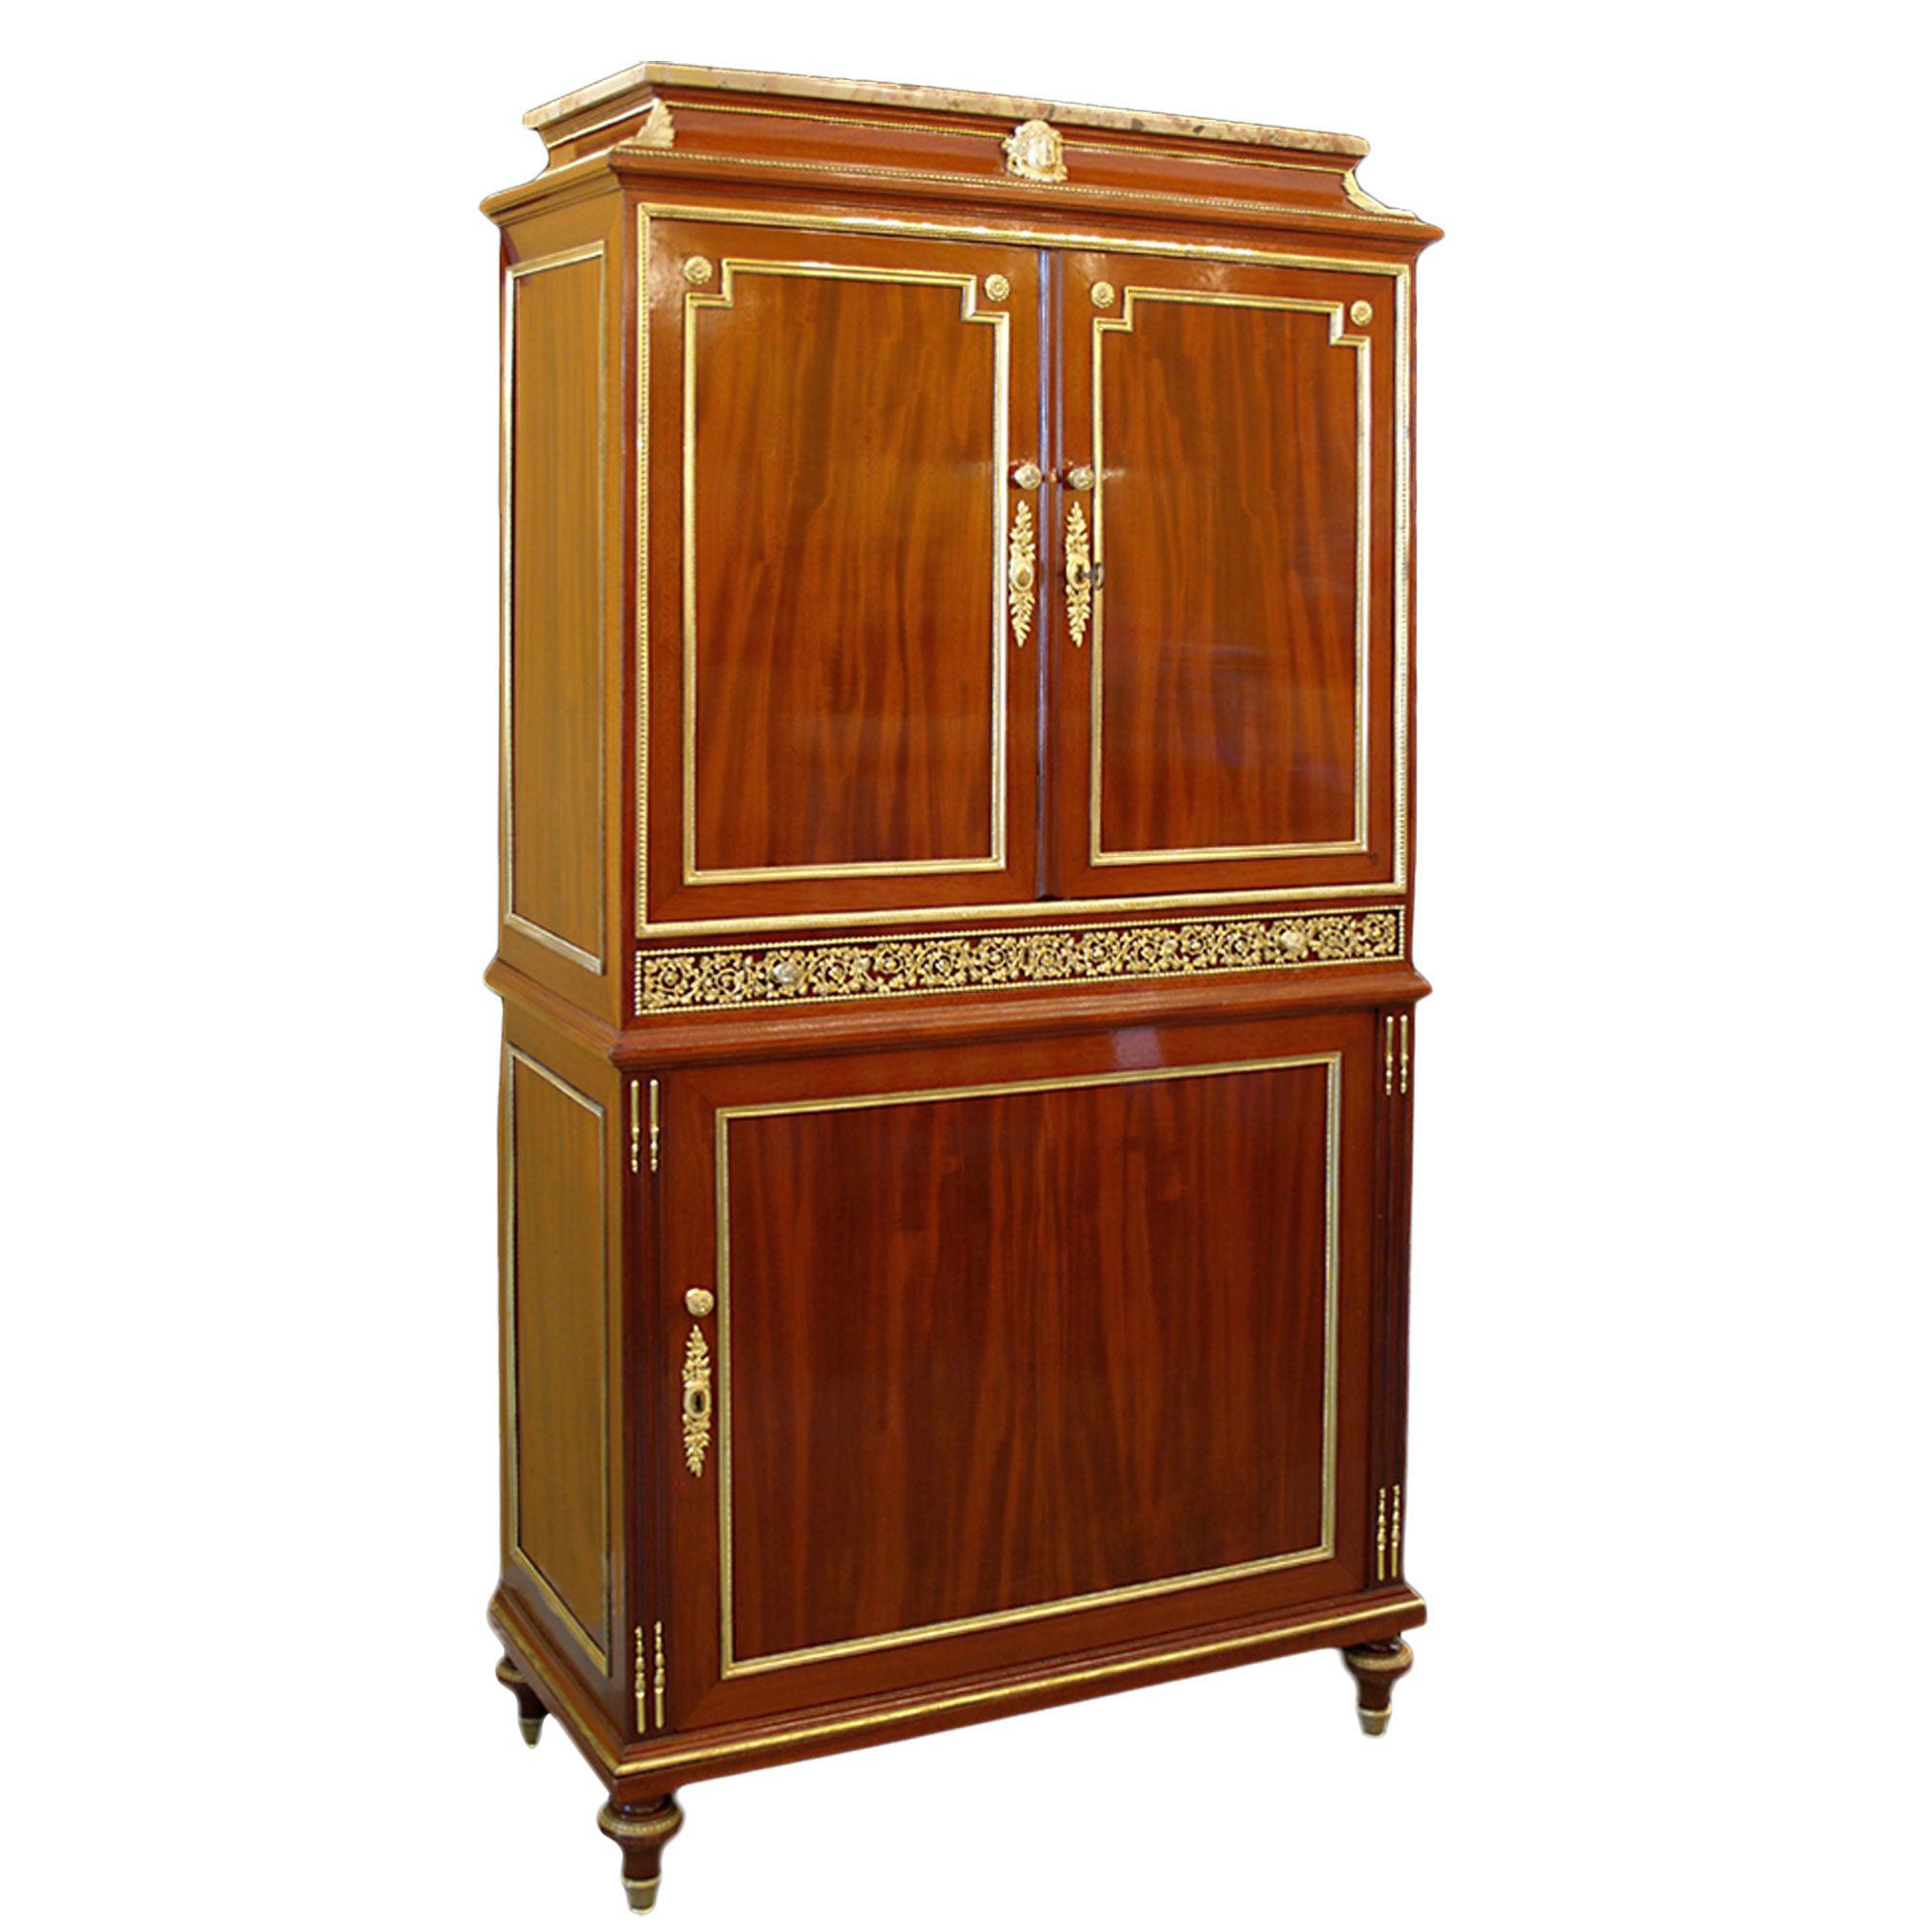 French 19th Century Cabinet Signed Deny, Paris